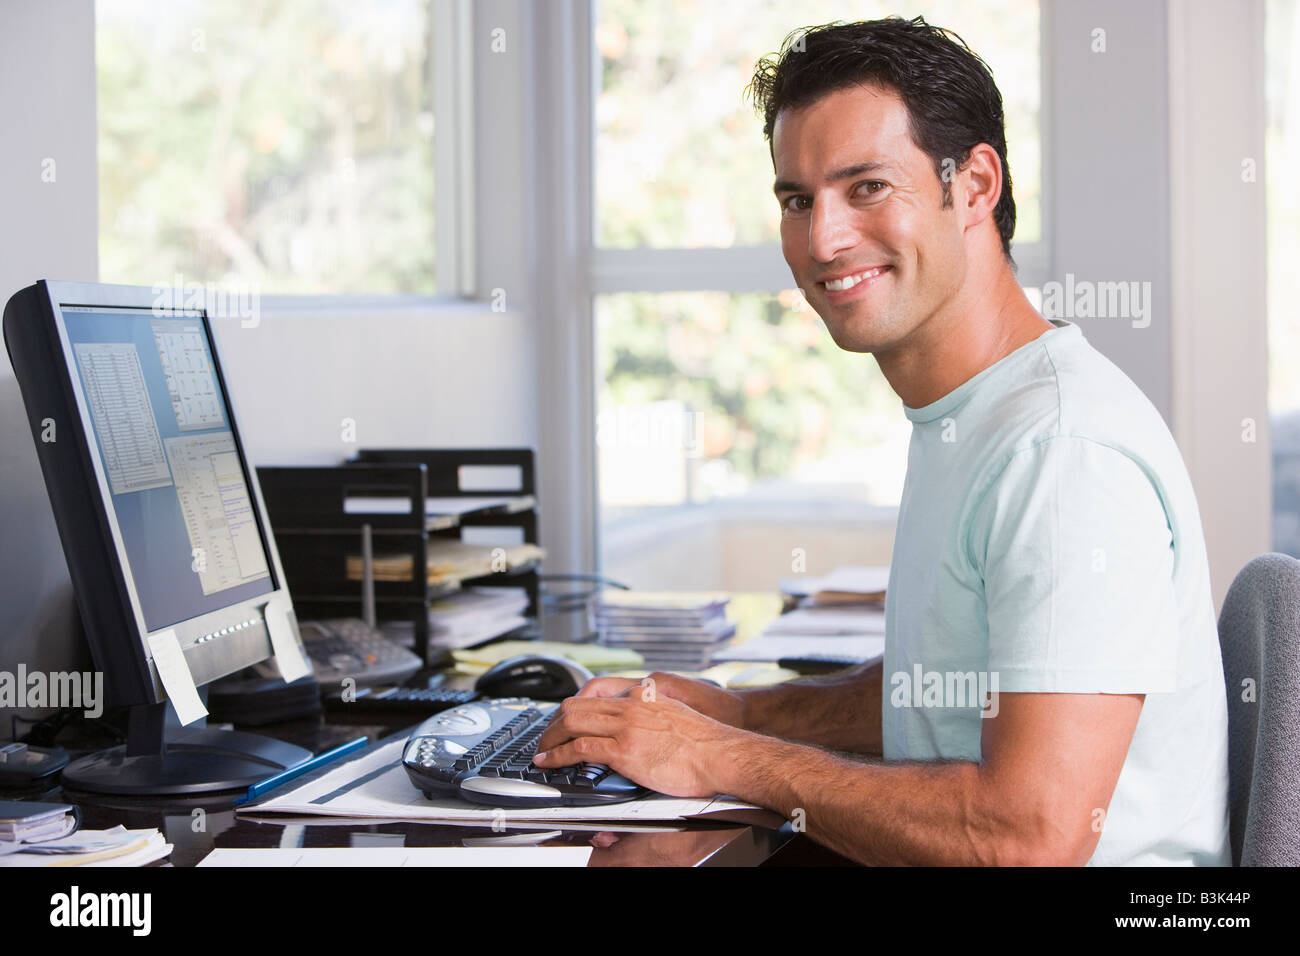 Man in home office using computer and smiling Stock Photo